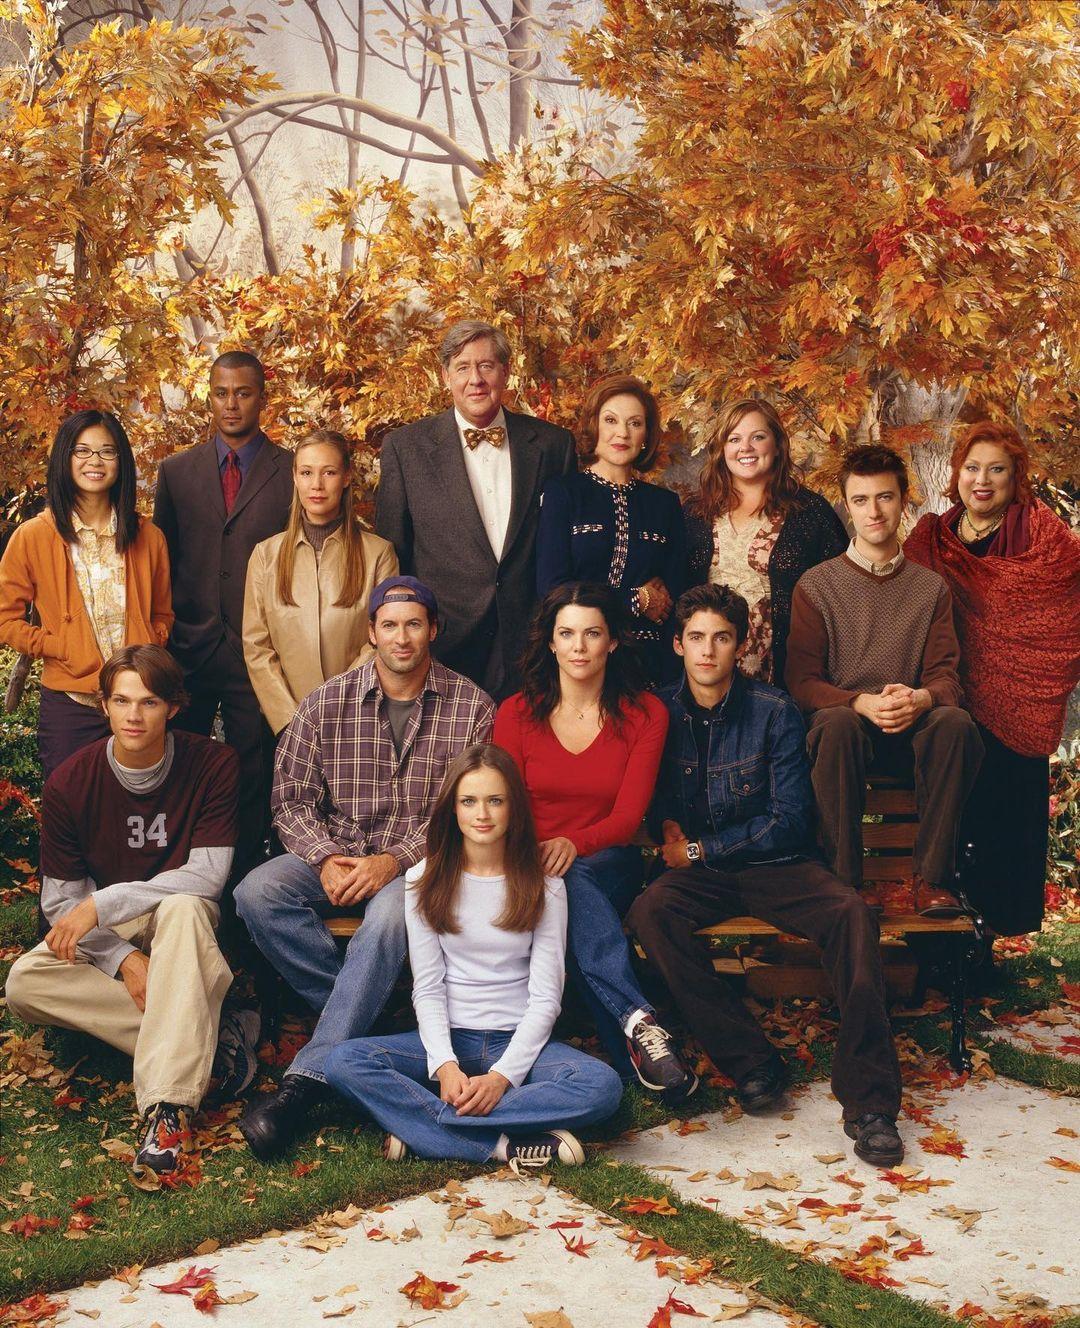 A photo showing the wonderful cast of 'Gilmore Girls.'